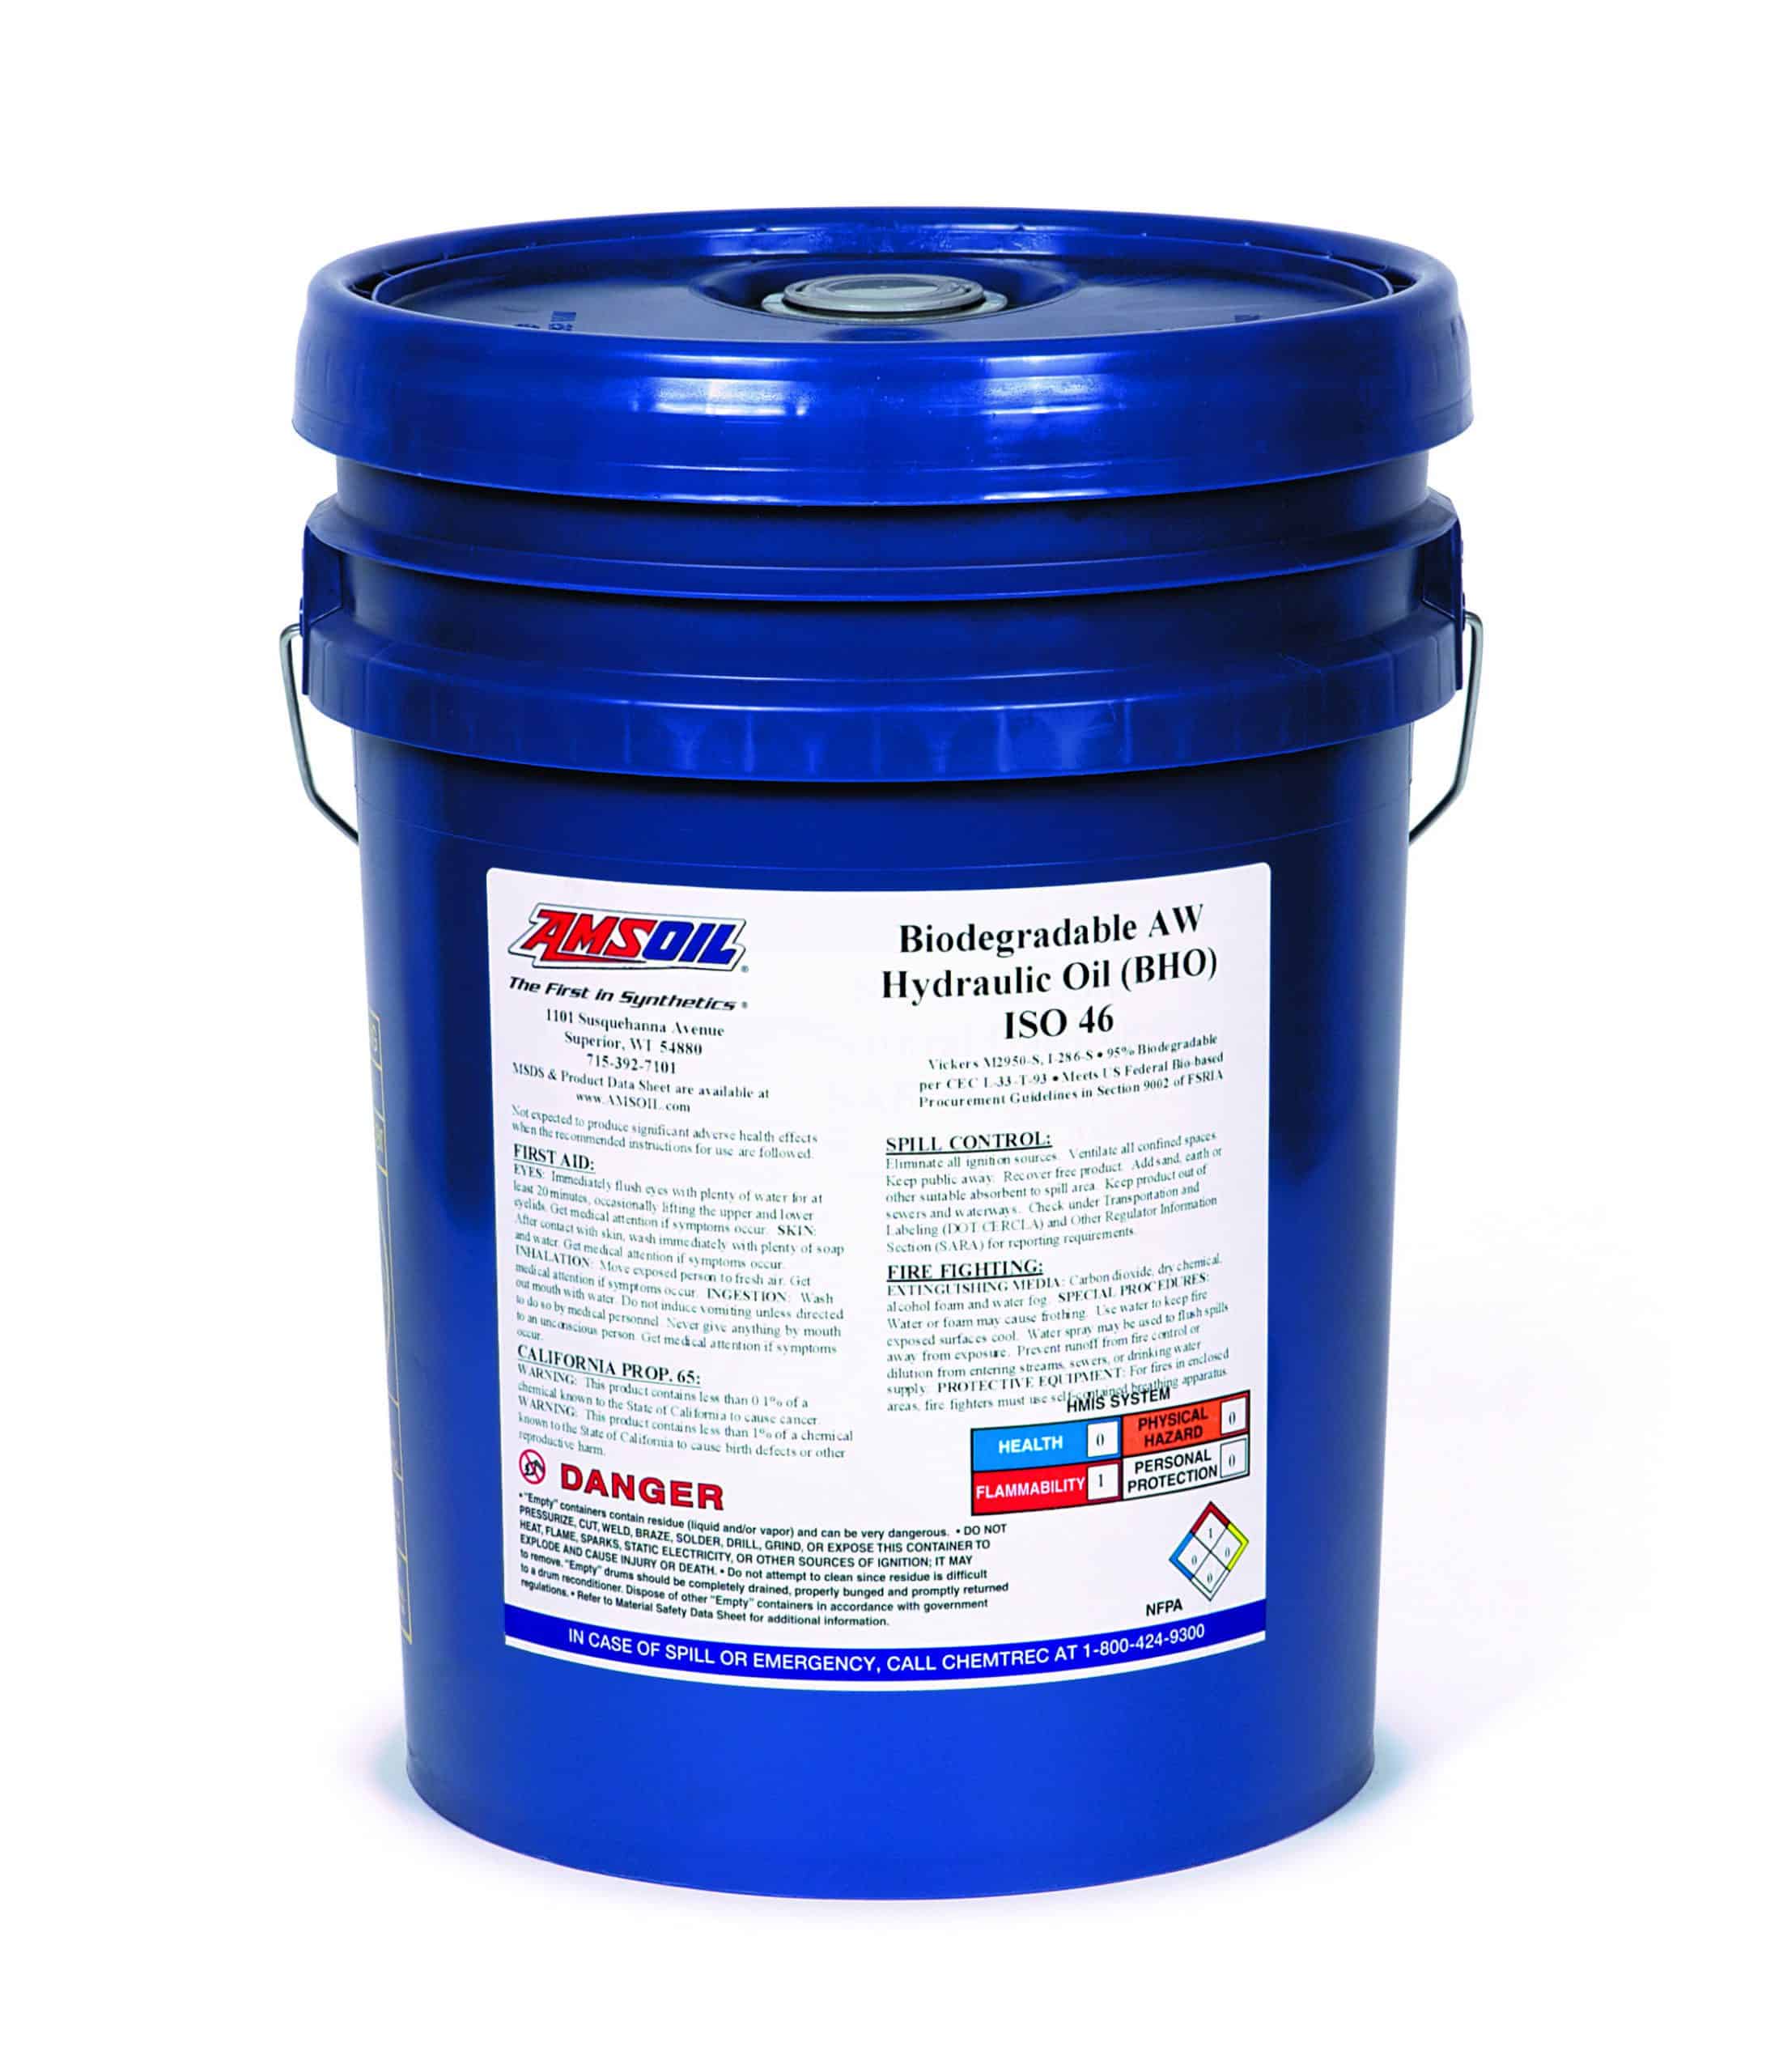 A bucket of Synthetic Biodegradable Hydraulic Oil, designed to deliver the ideal combination of excellent biodegradability and wear protection.